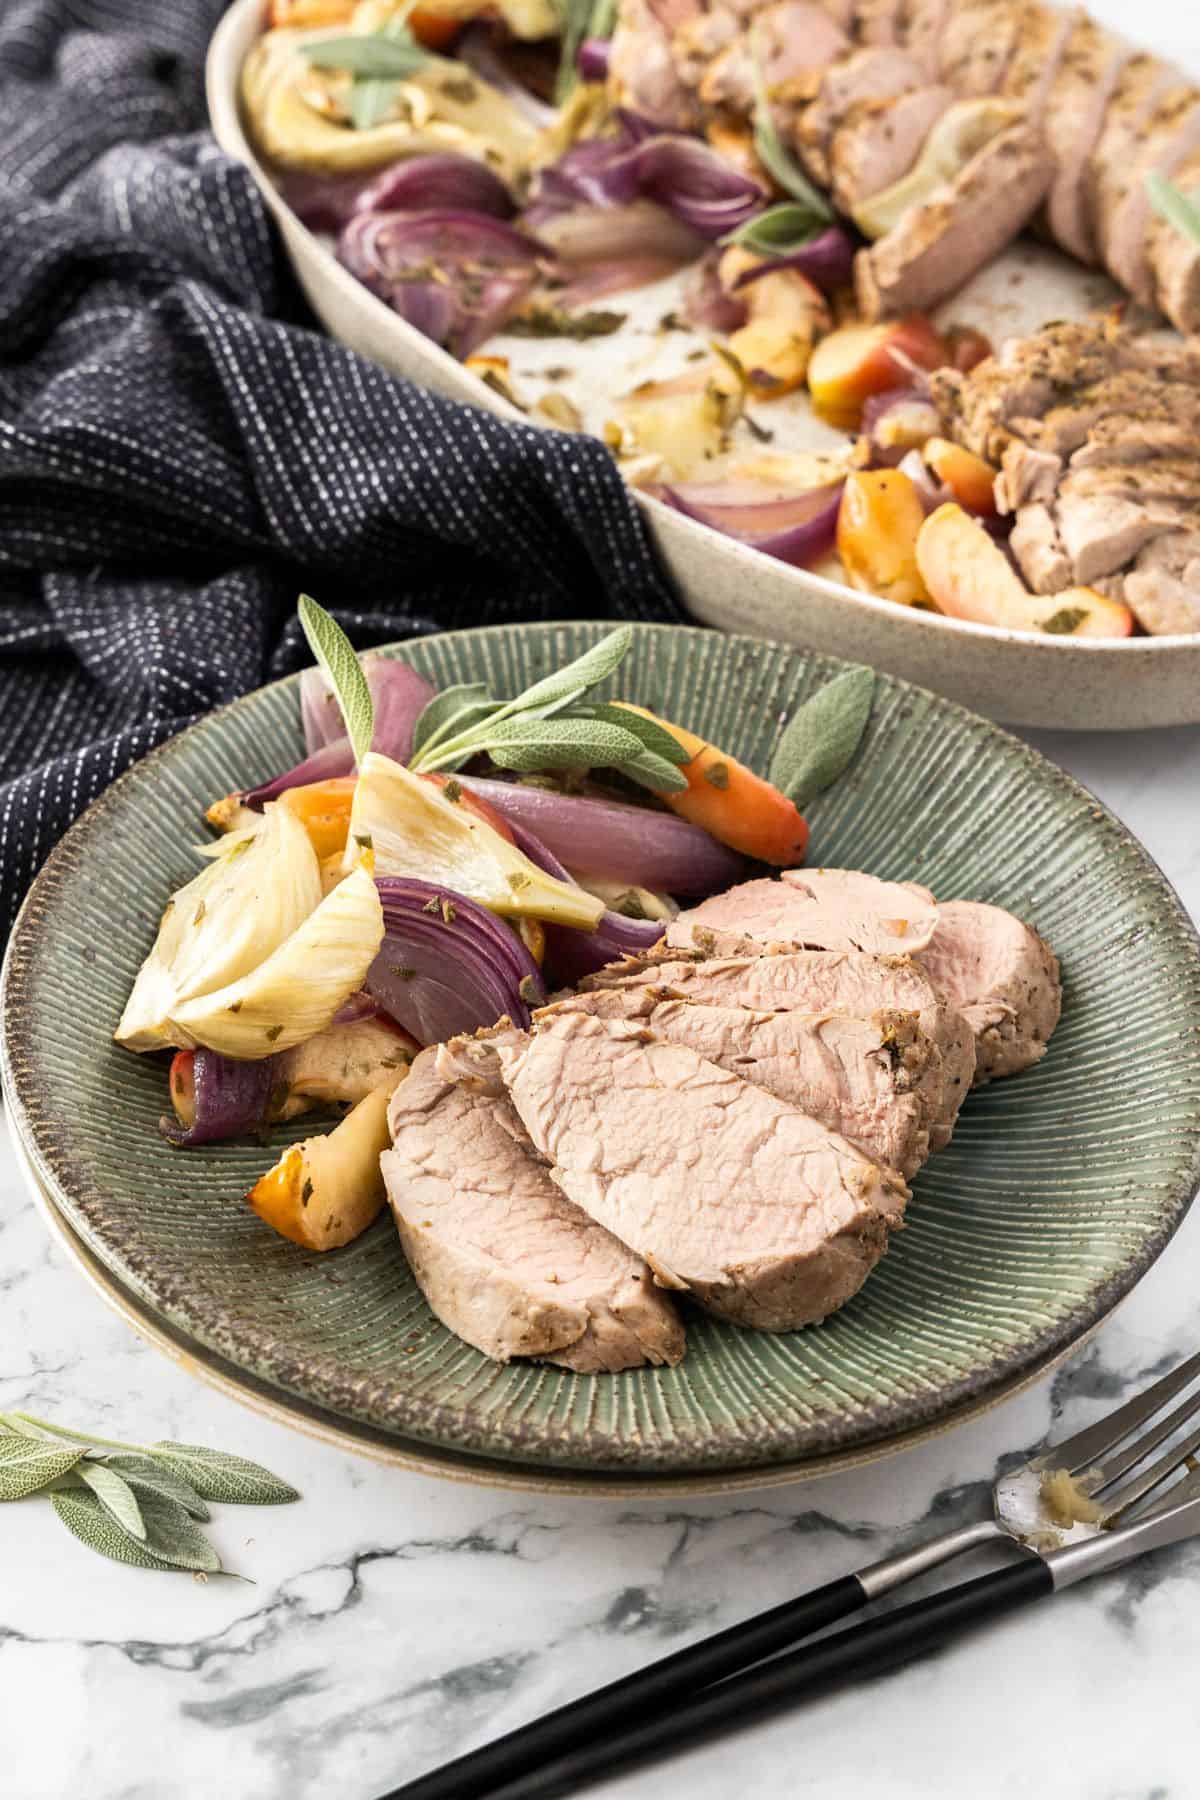 Serving of Roasted Pork Tenderloin, with the vegetables on the side, and the platter of meat in the background.